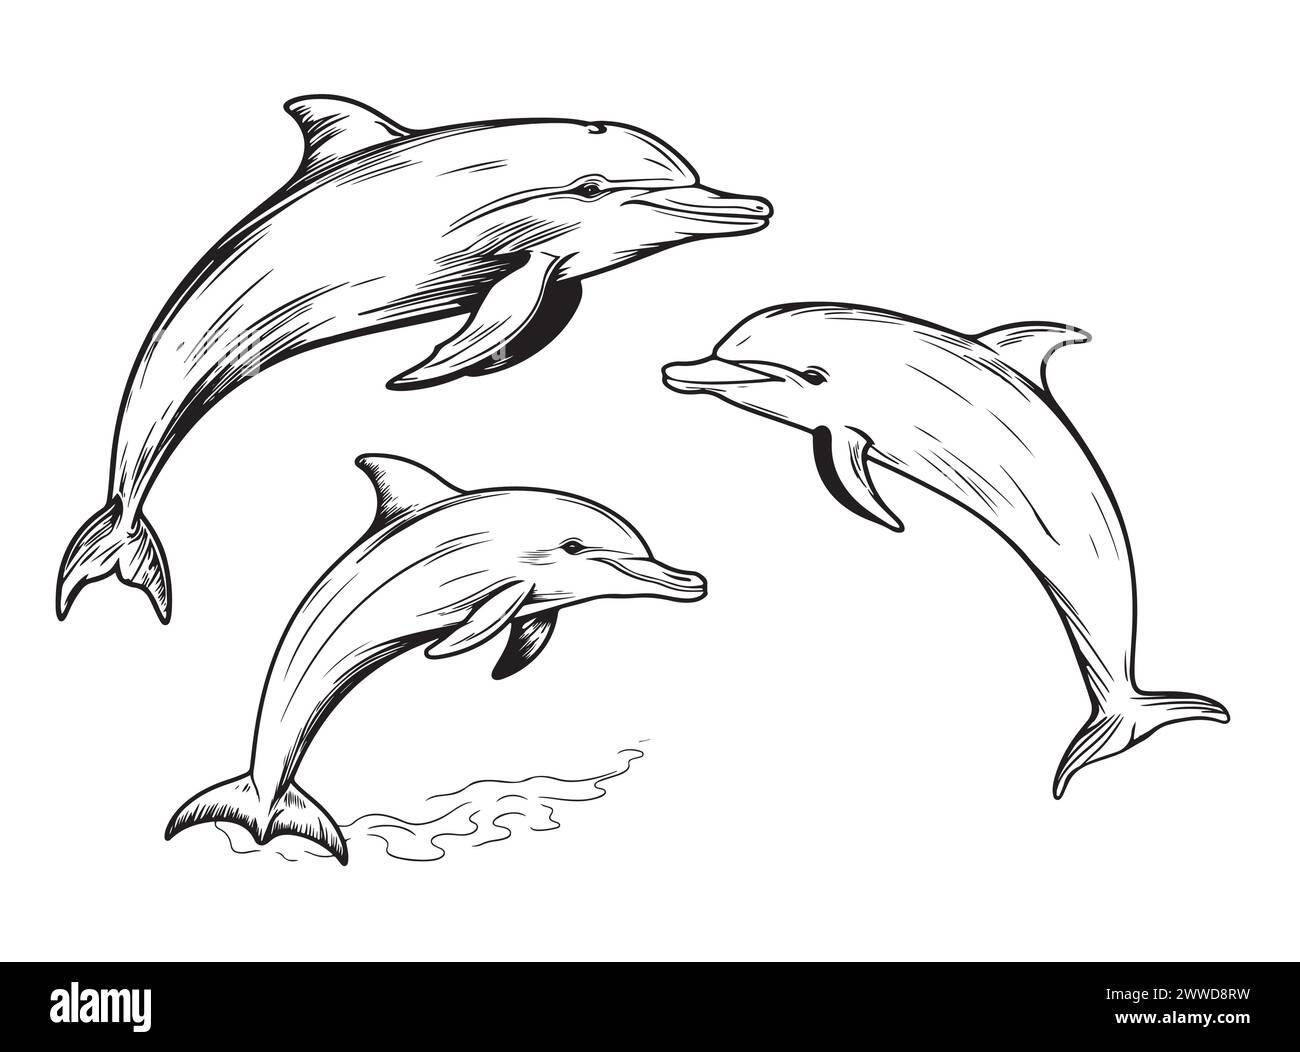 Dolphins jumping hand drawn sketch Vector dolphins Stock Vector